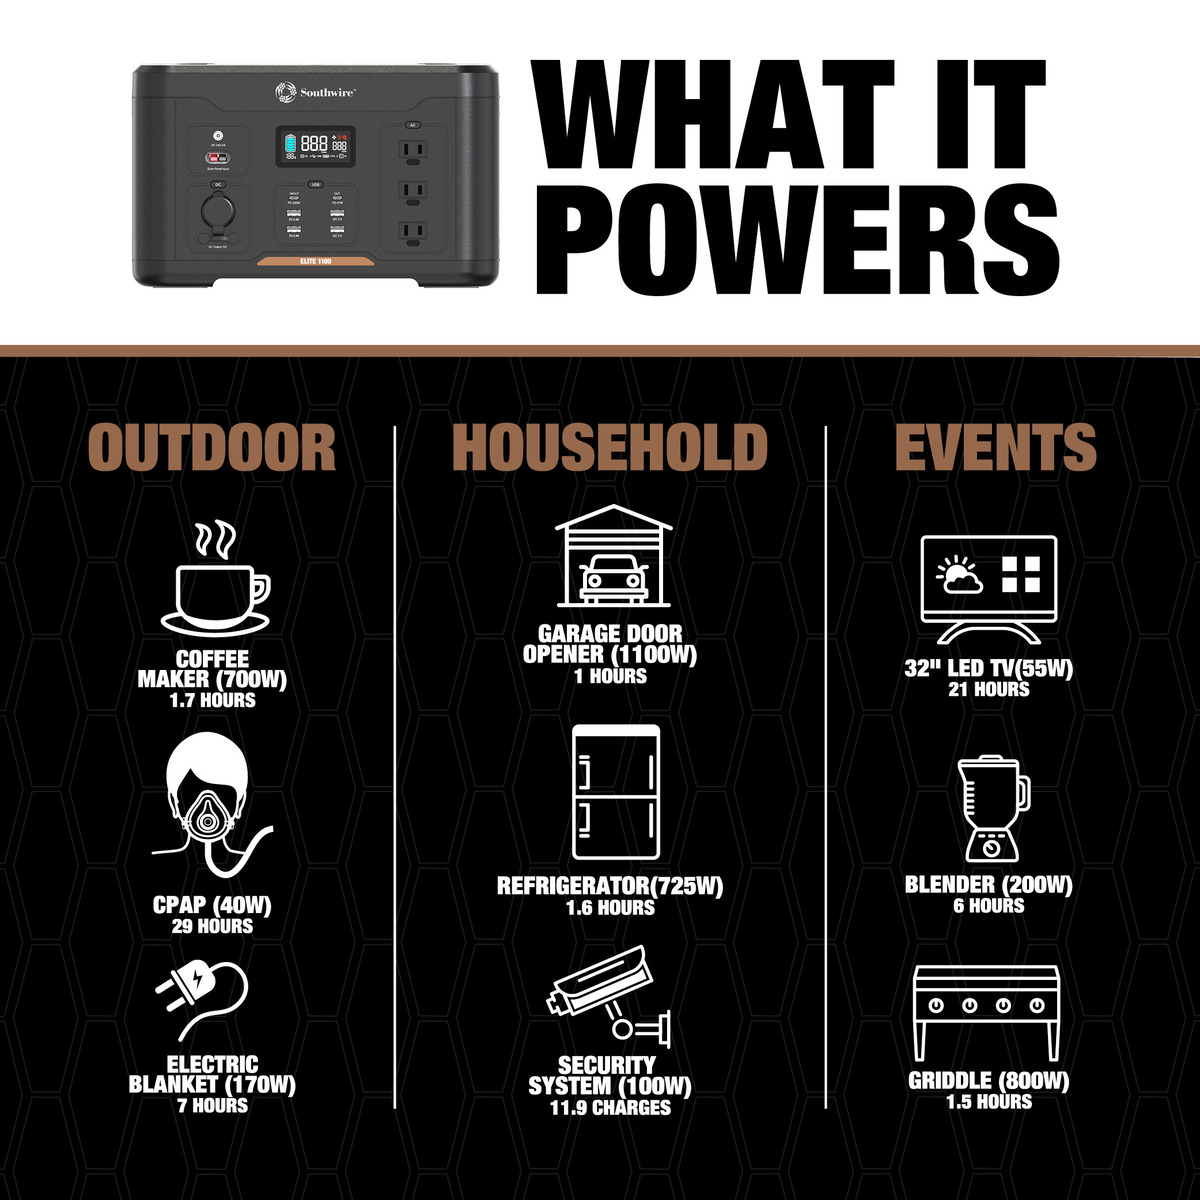 PORTABLE POWER STATION 1100 WITH 1166 WATT-HOURS OF POWER, FEATURES PURE SINE WAVE, 6 USB PORTS, 3 AC OUTLETS, 12V DC OUTLET. FOLDING HANDLE AND 22.5 LBS